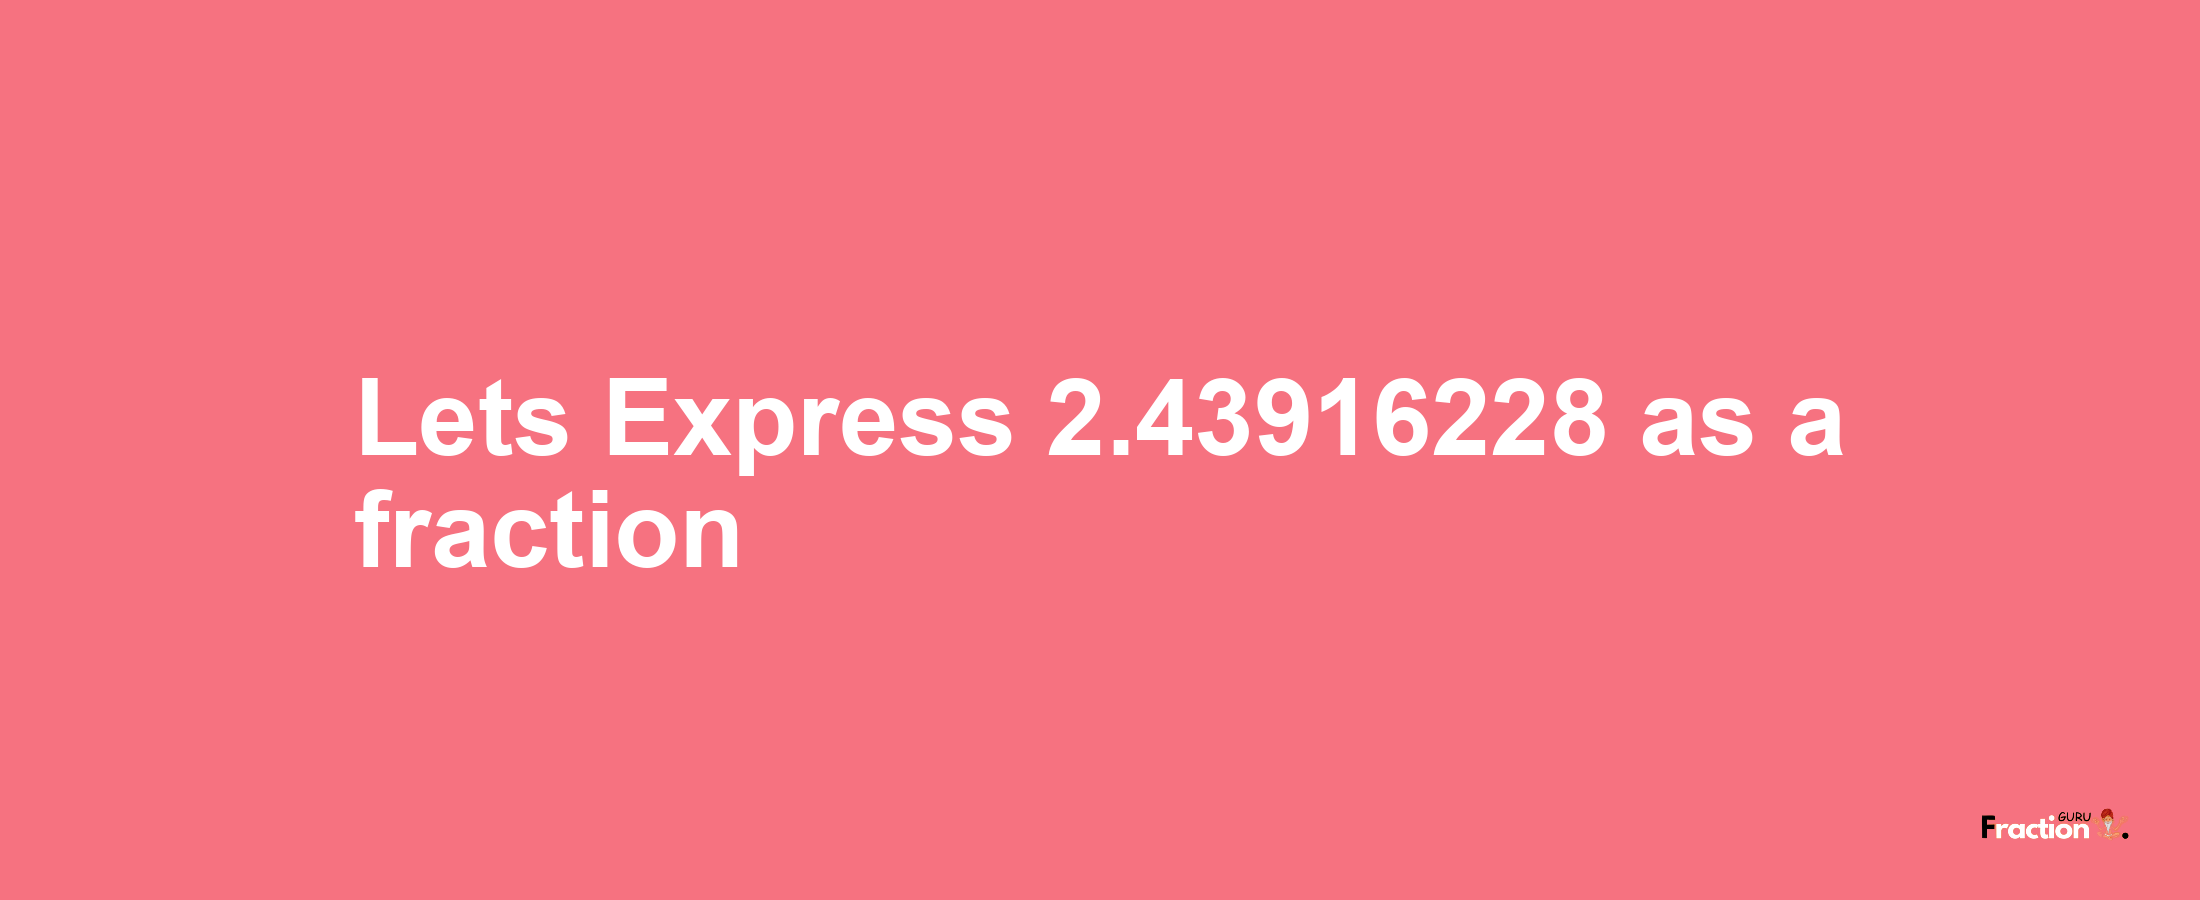 Lets Express 2.43916228 as afraction